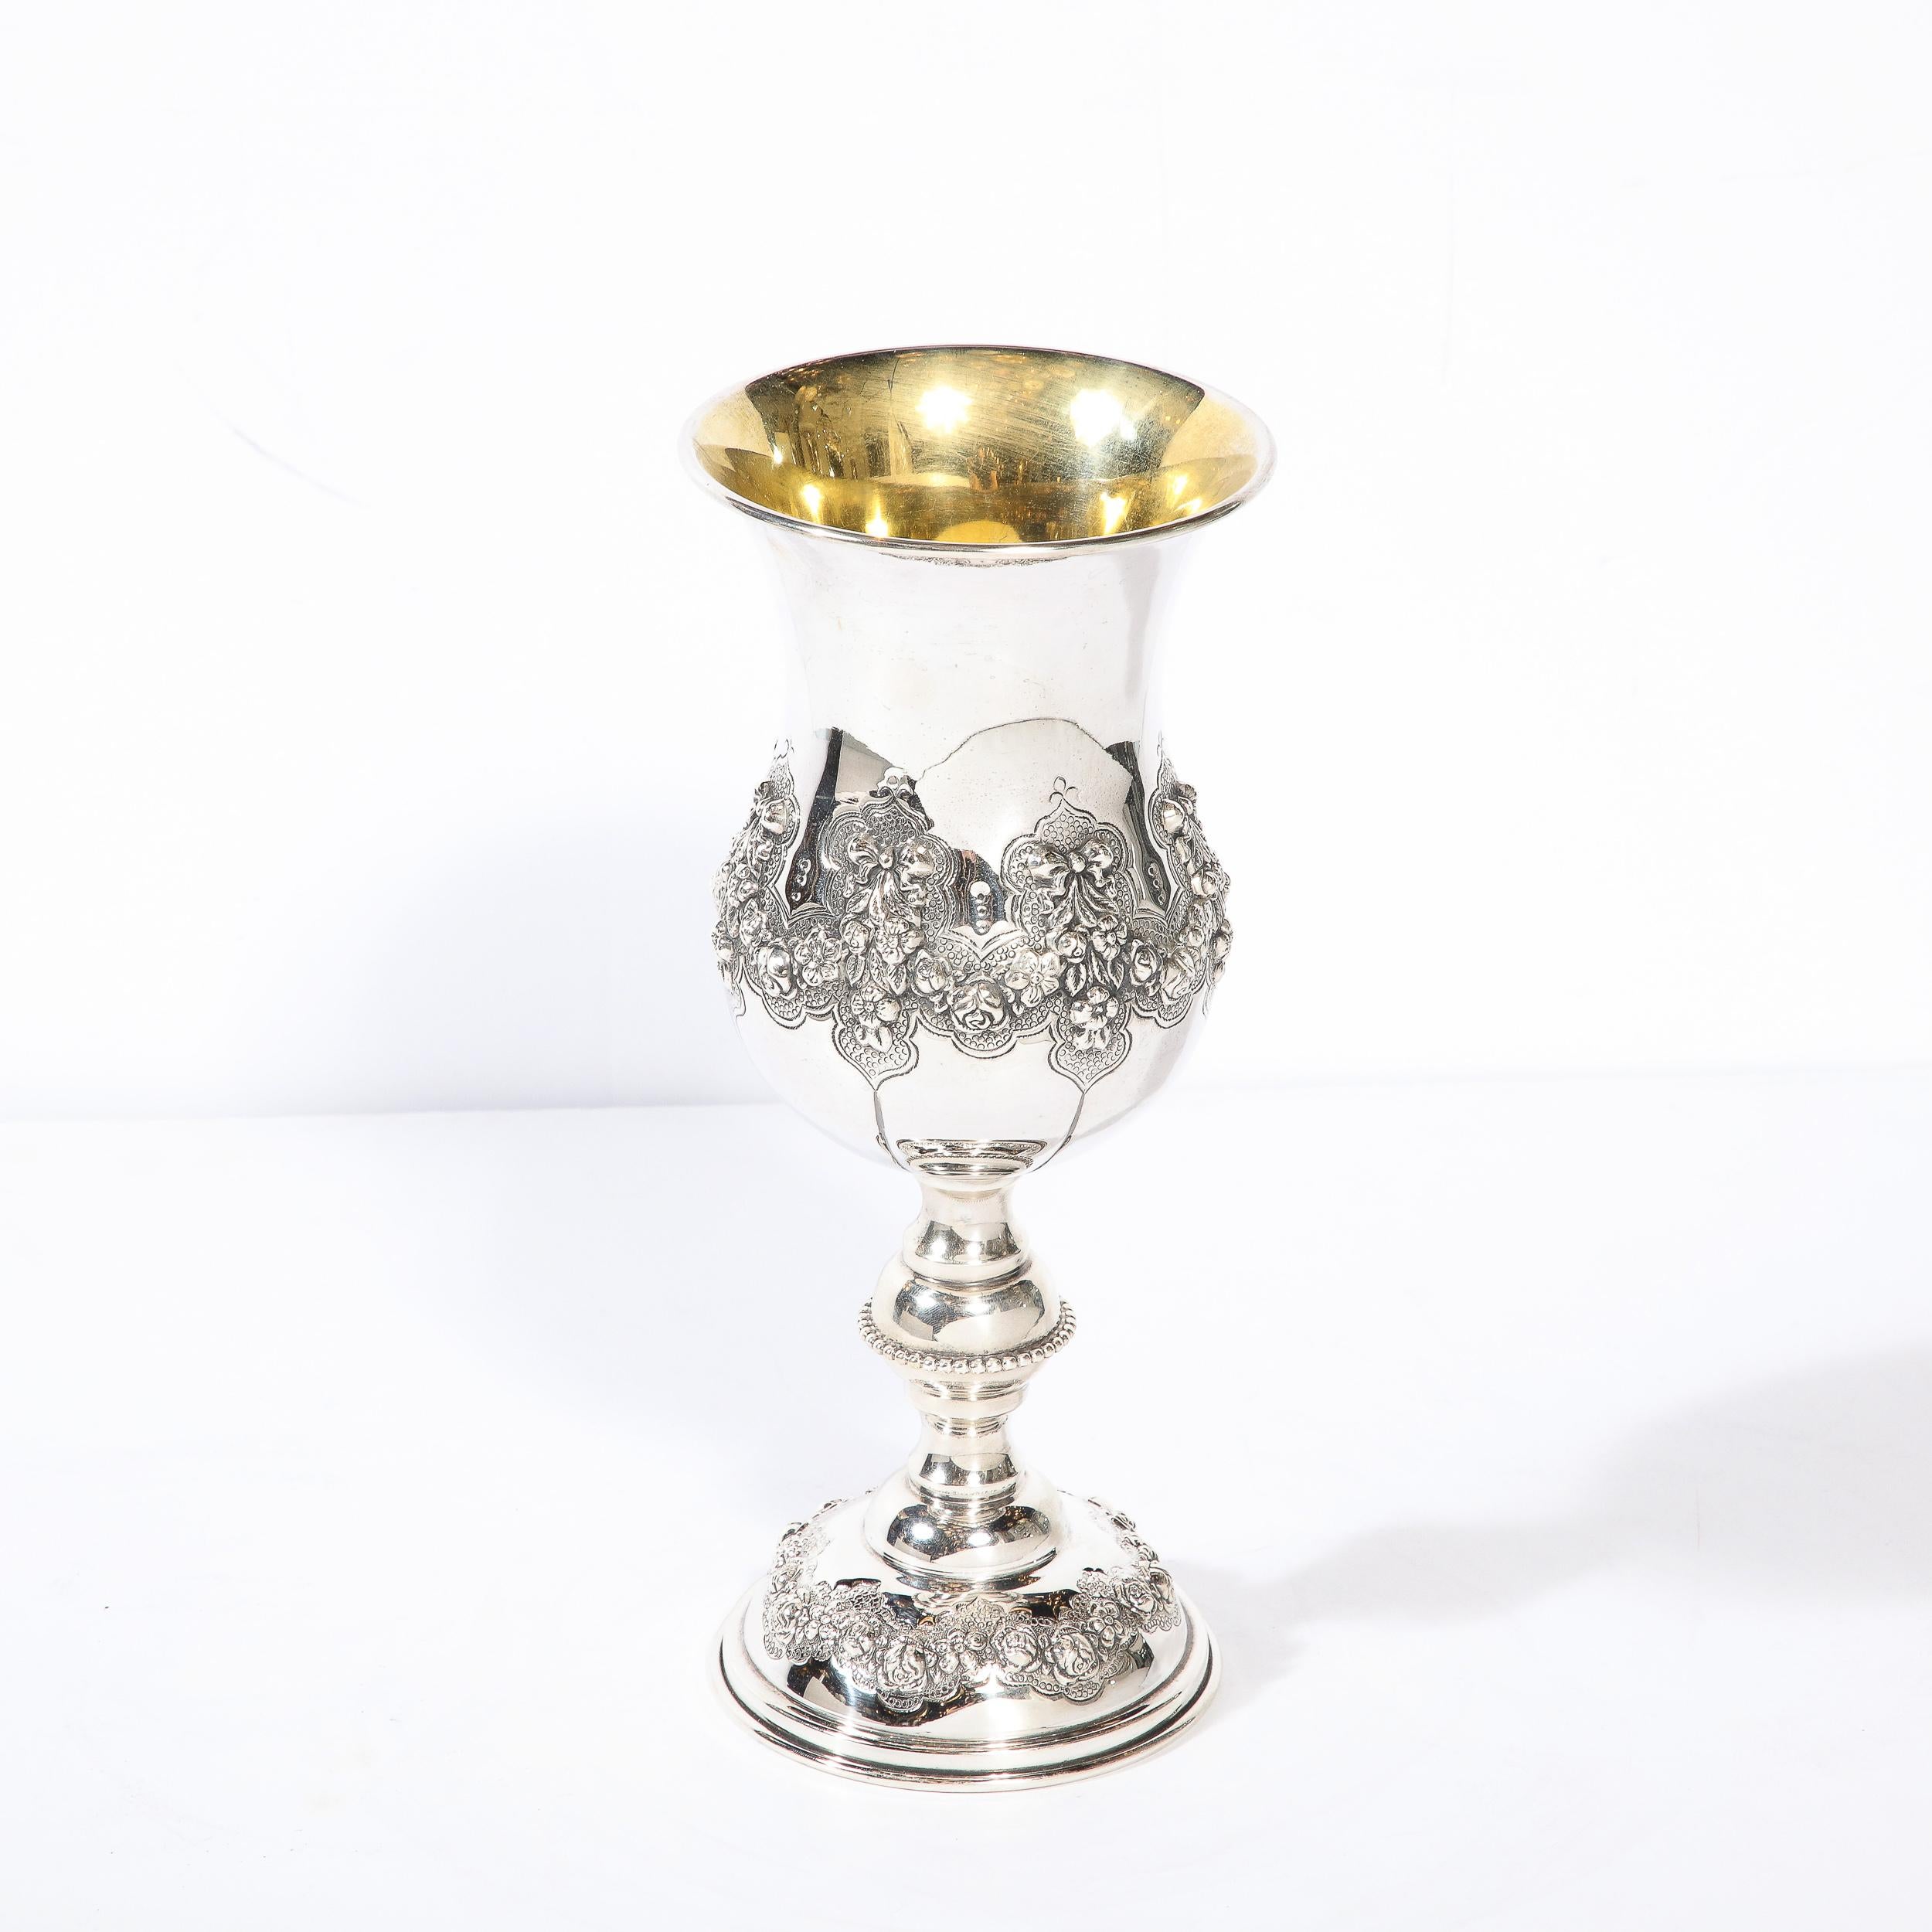 Repoussé Monumental Sterling  Kiddish Goblet with Repousse Designs  by Hadad Brothers For Sale